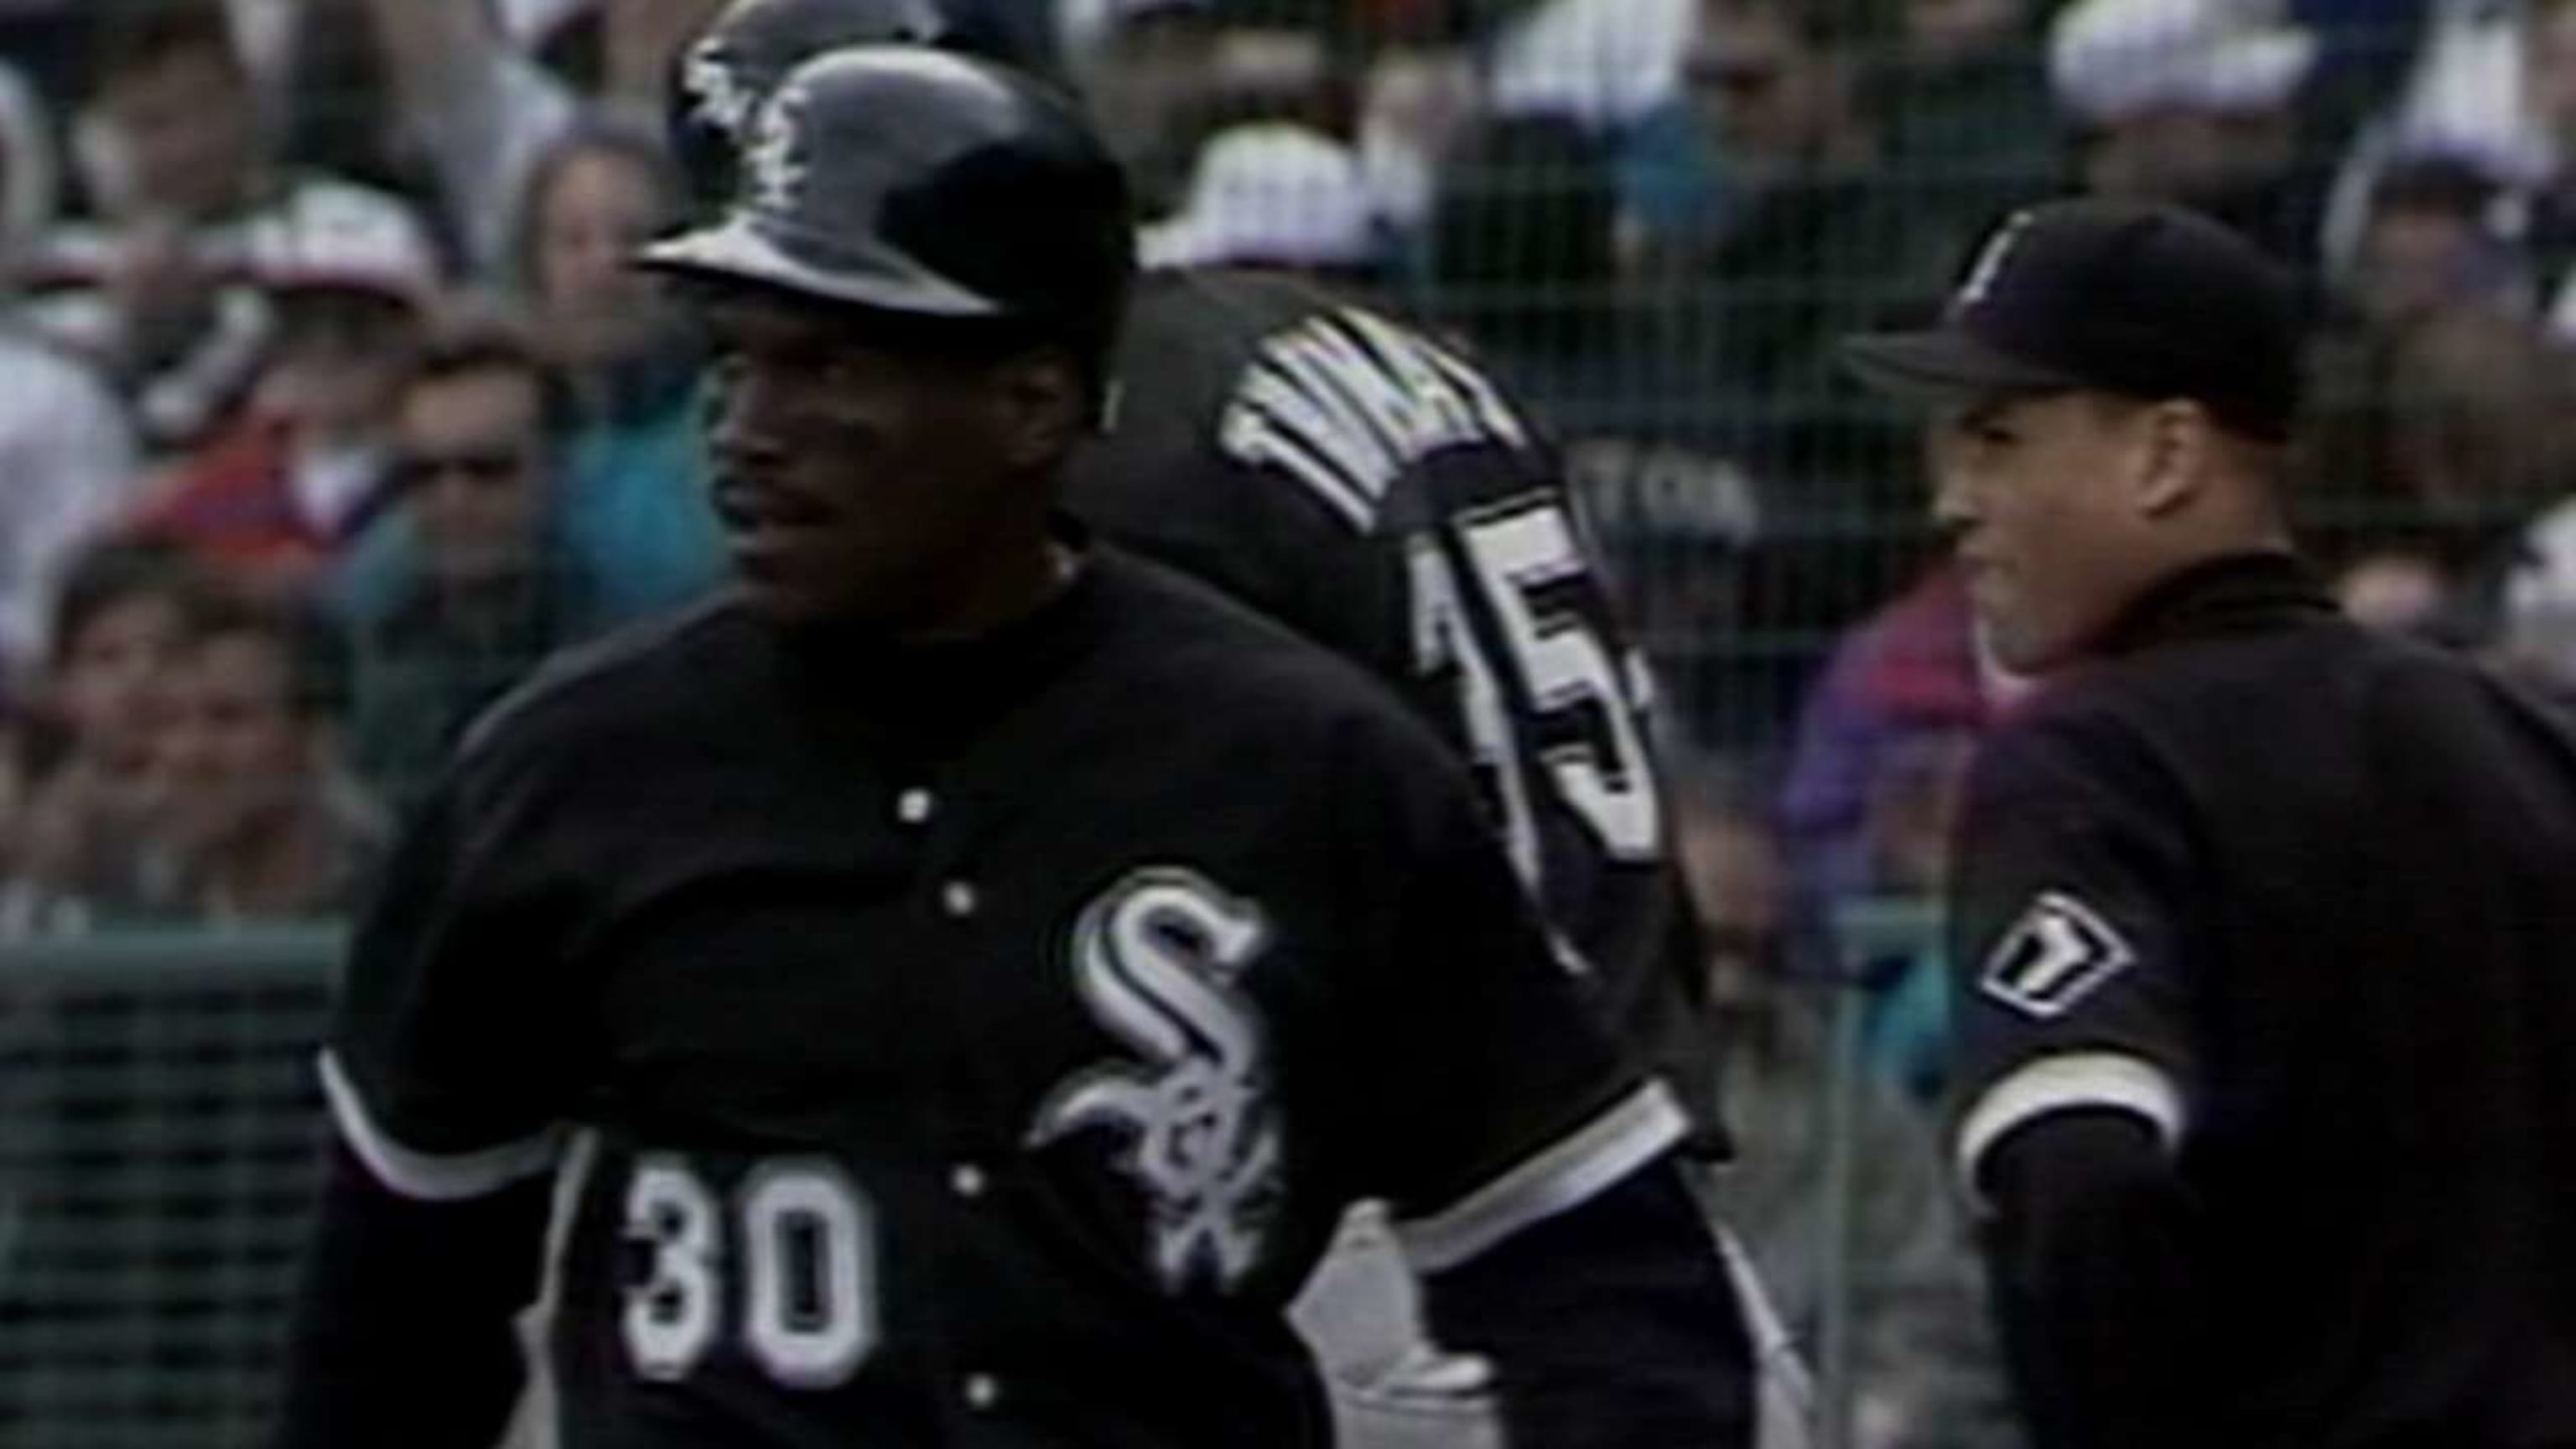 Three HOF highlights you may not remember from Tim Raines, Jeff